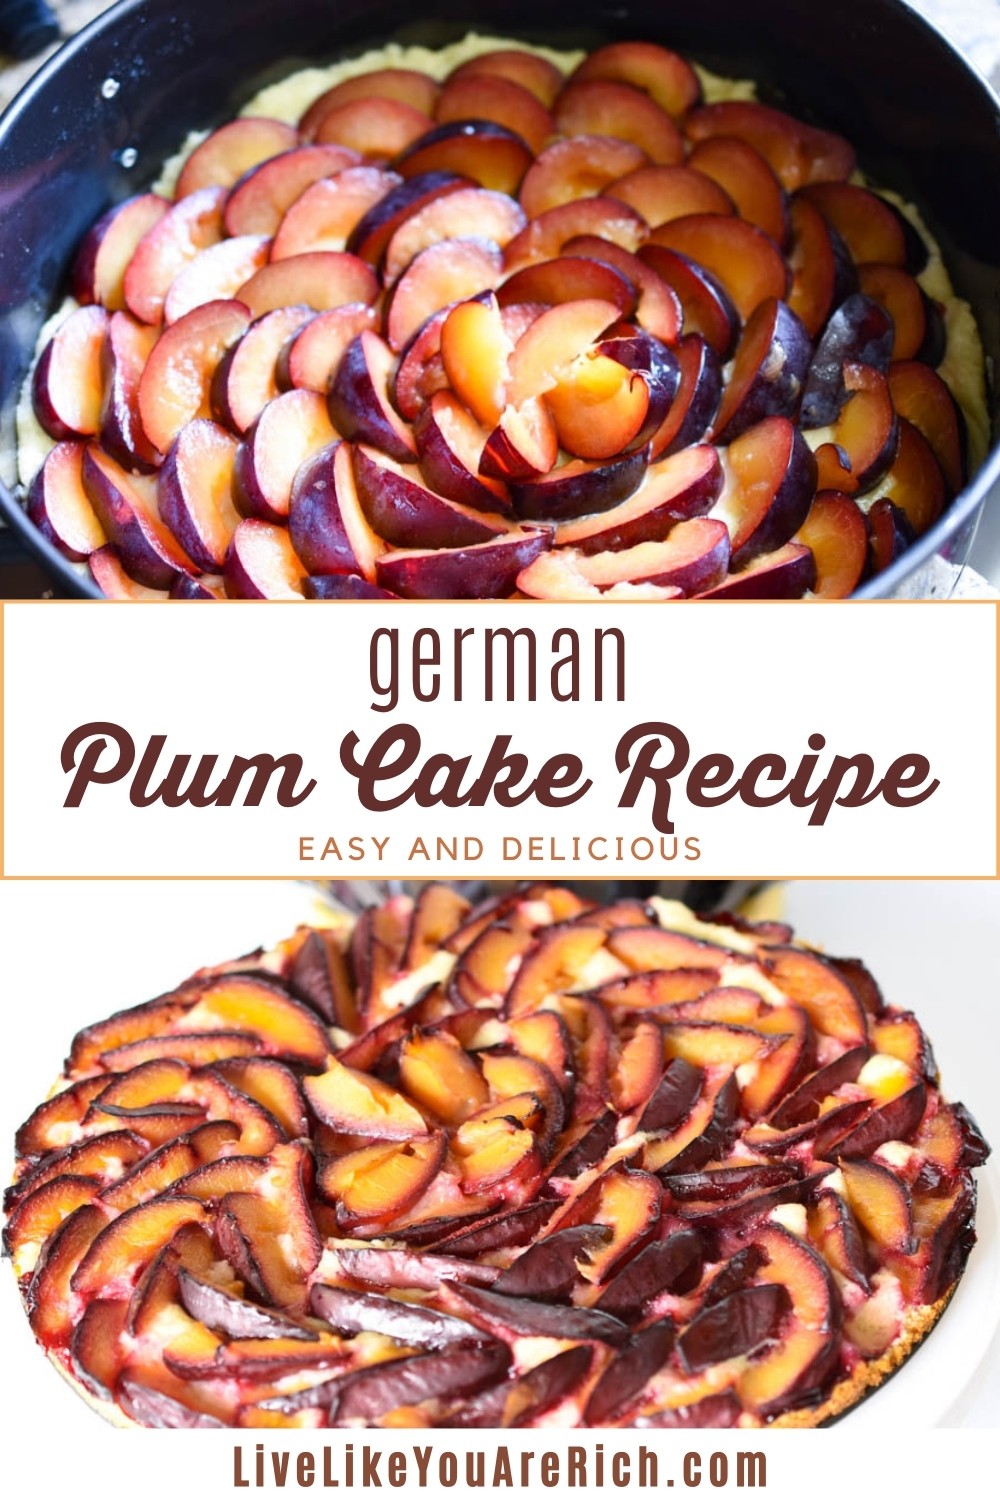 This German Plum Cake is a combination of a deliciously moist lemon tart topped with sweet plums baked to perfection. Super easy to make and delicious. #germanplumcake #plumcake